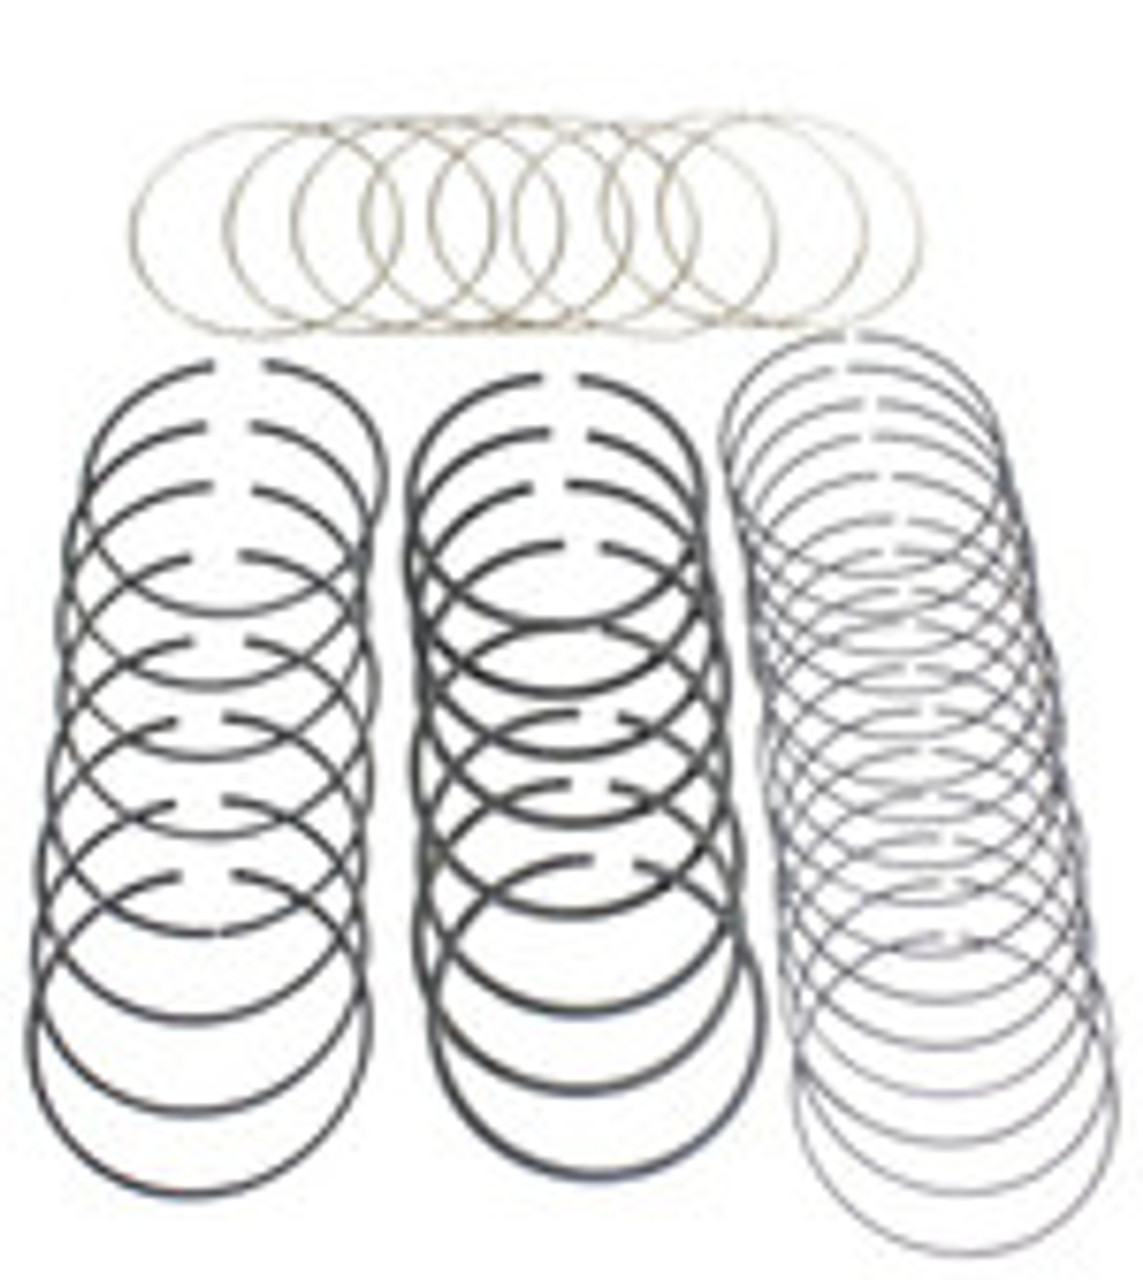 Piston Ring Set - 2015 Ford Expedition 3.5L Engine Parts # PR4198ZE23